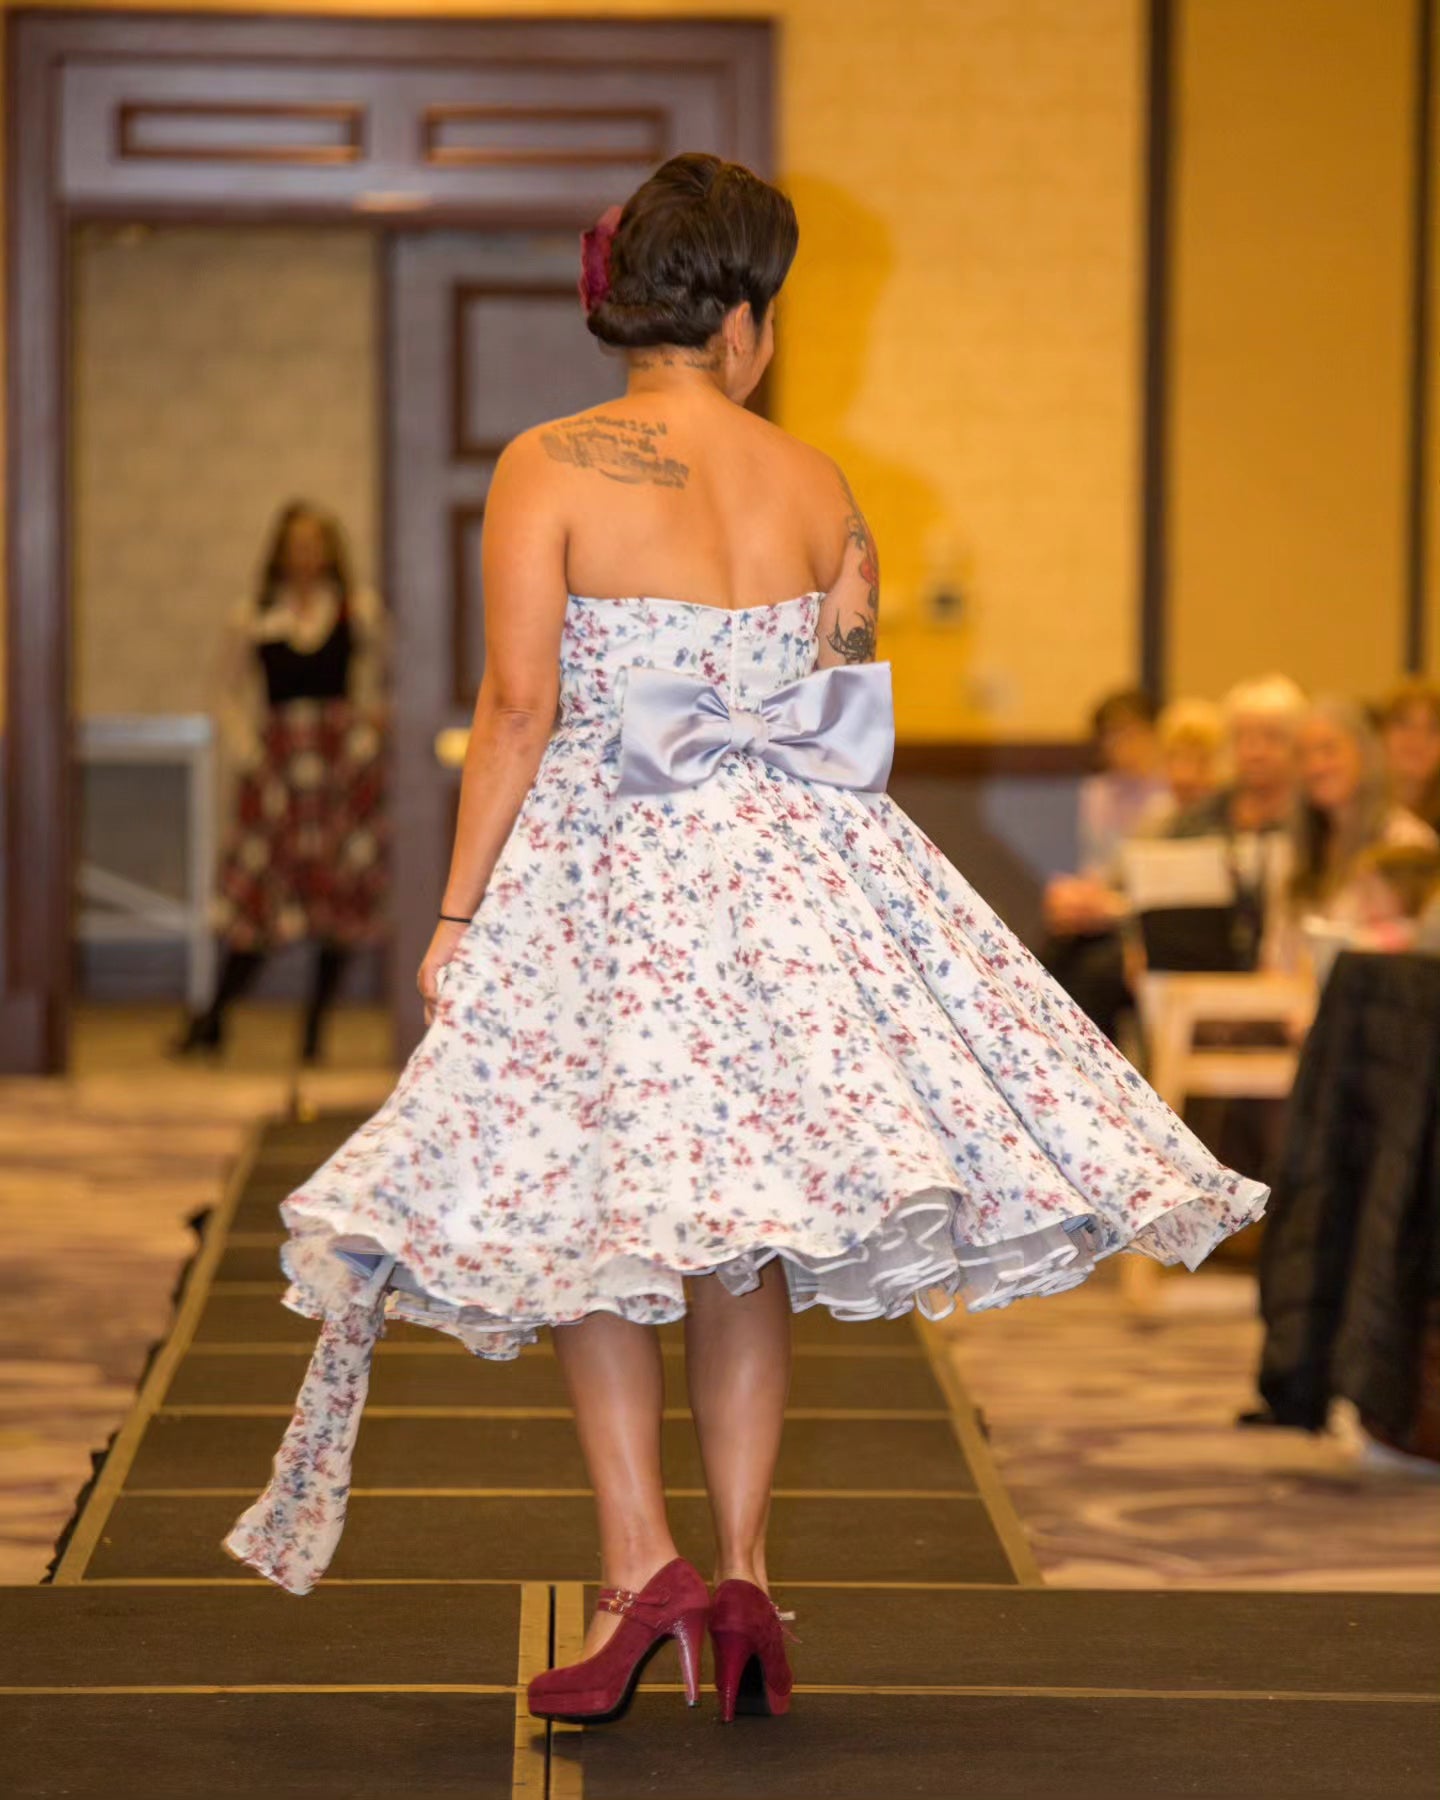 As seen in Zonta Club of Milwaukee Fashion Show 

Floral Chiffon 1950's inspired dress

Pleated bodice on a chevron, fully lined and boned

Three layers of a full circle skirt with pockets